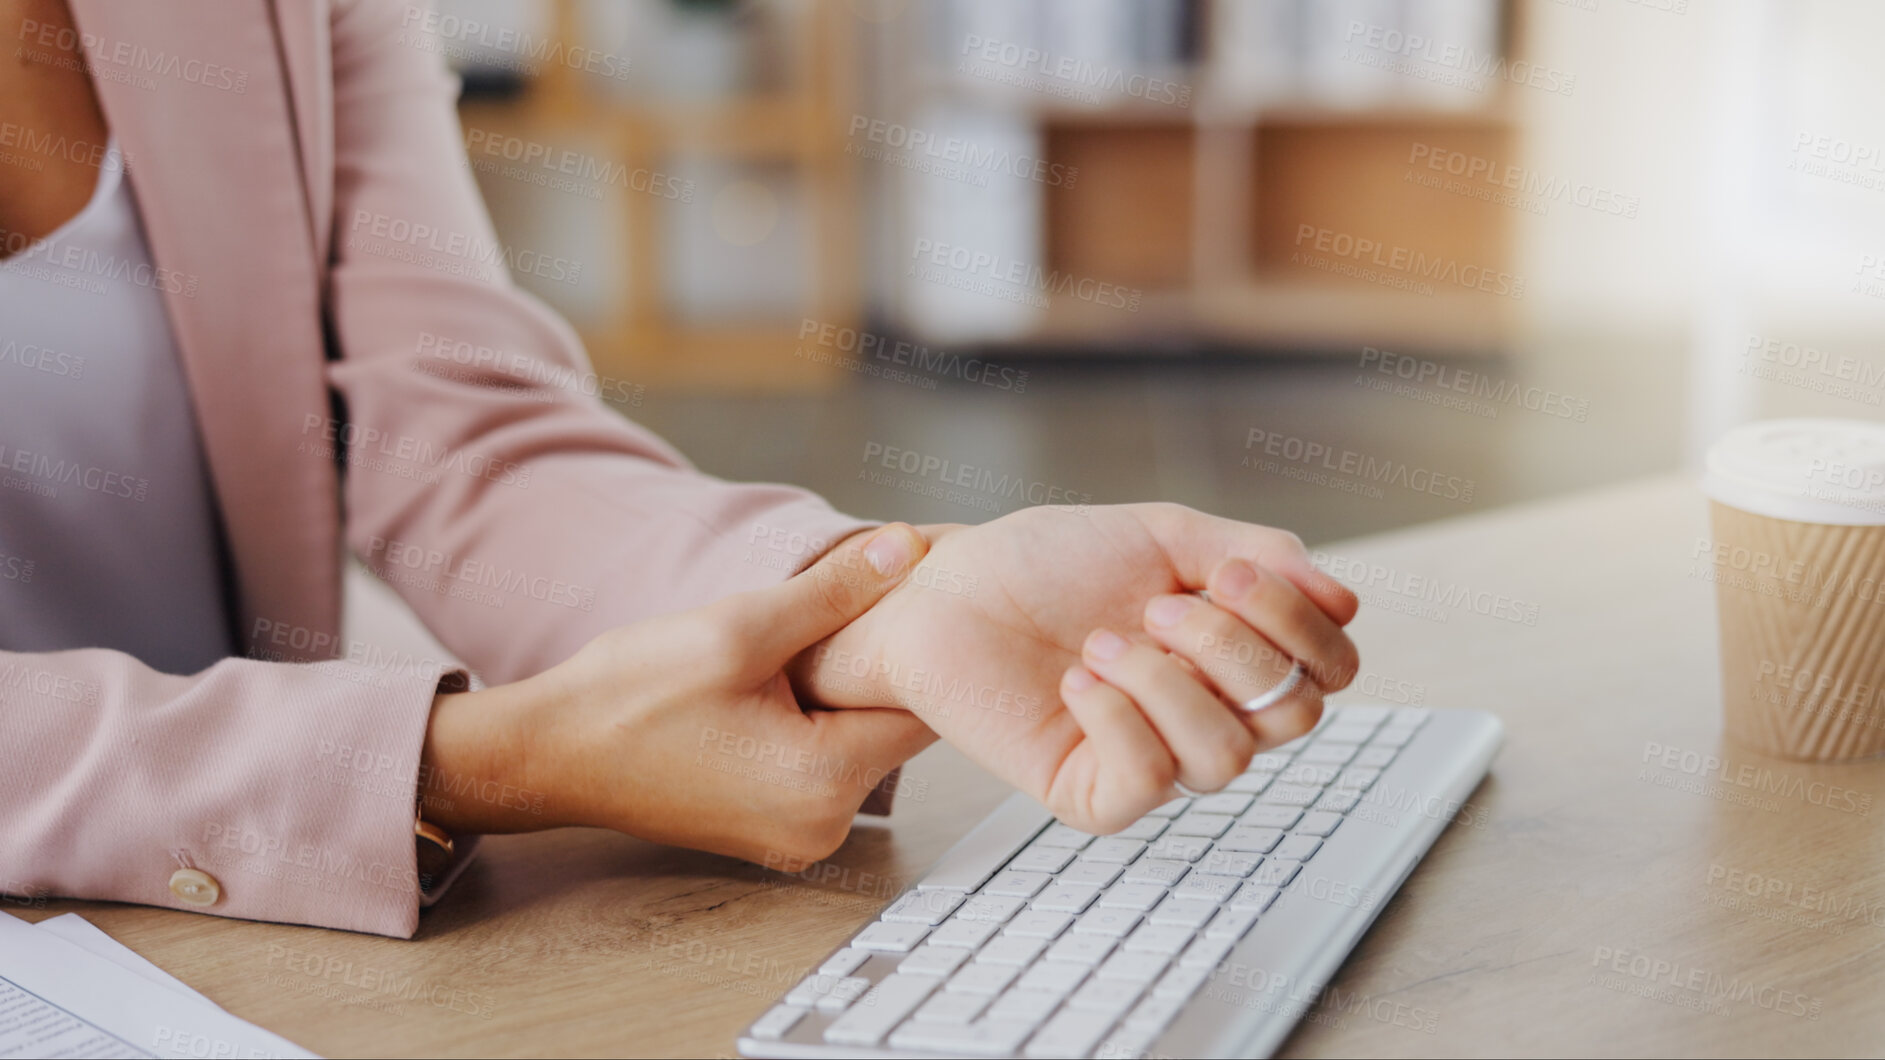 Buy stock photo Hands, massage and woman with injury problem, carpal tunnel syndrome or wrist accident from keyboard typing, Medical emergency, anatomy crisis and hurt female employee with pain, arthritis or risk